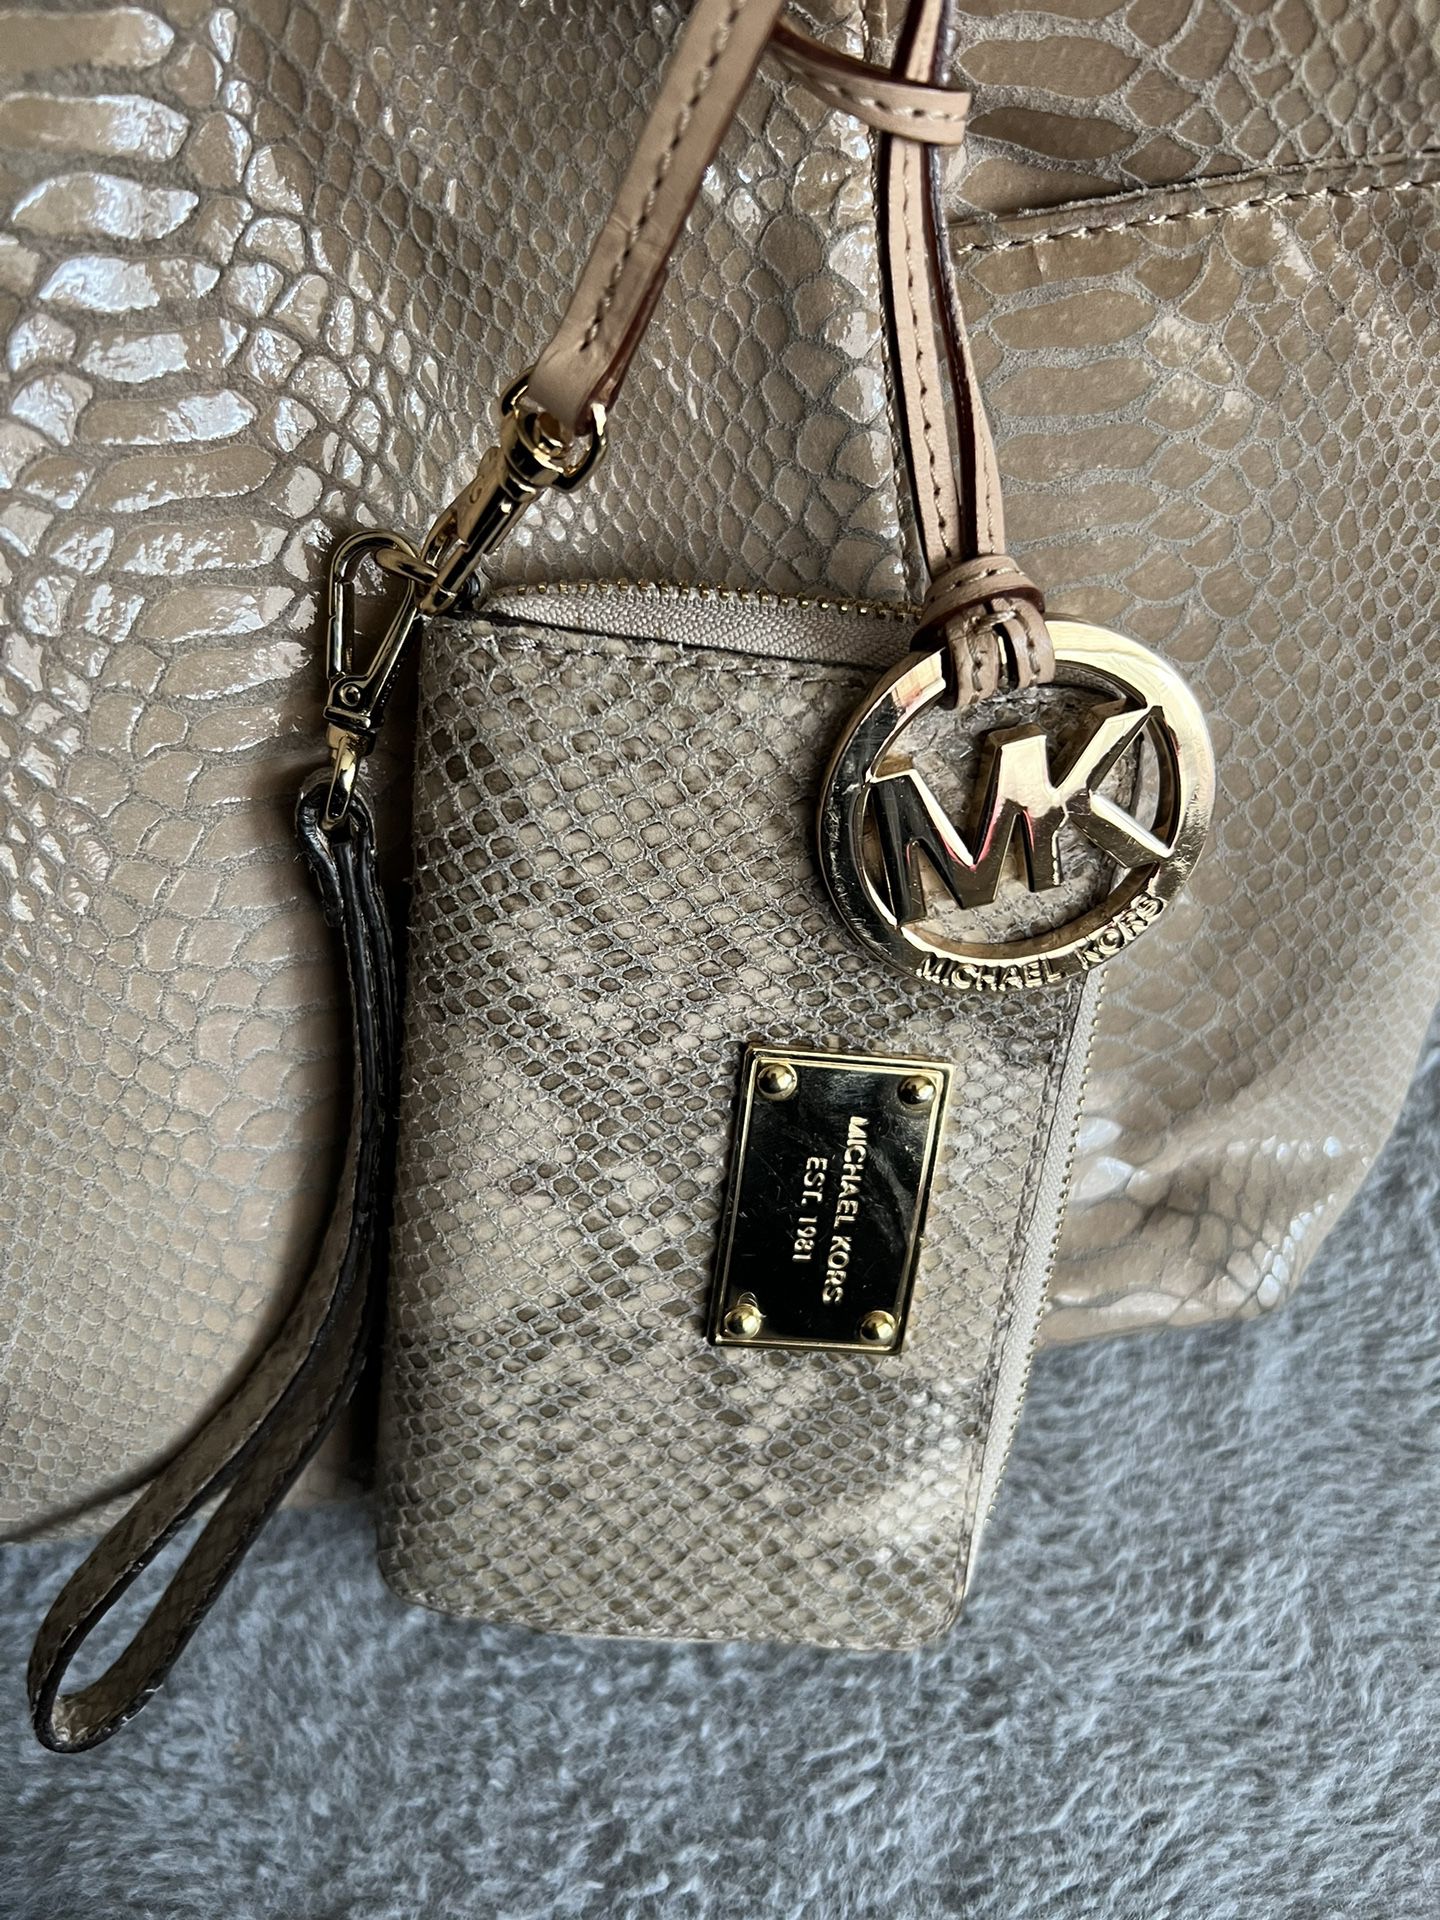 Michael Kors Small Jet Set Purse With Matching Wallet for Sale in Westerly,  RI - OfferUp